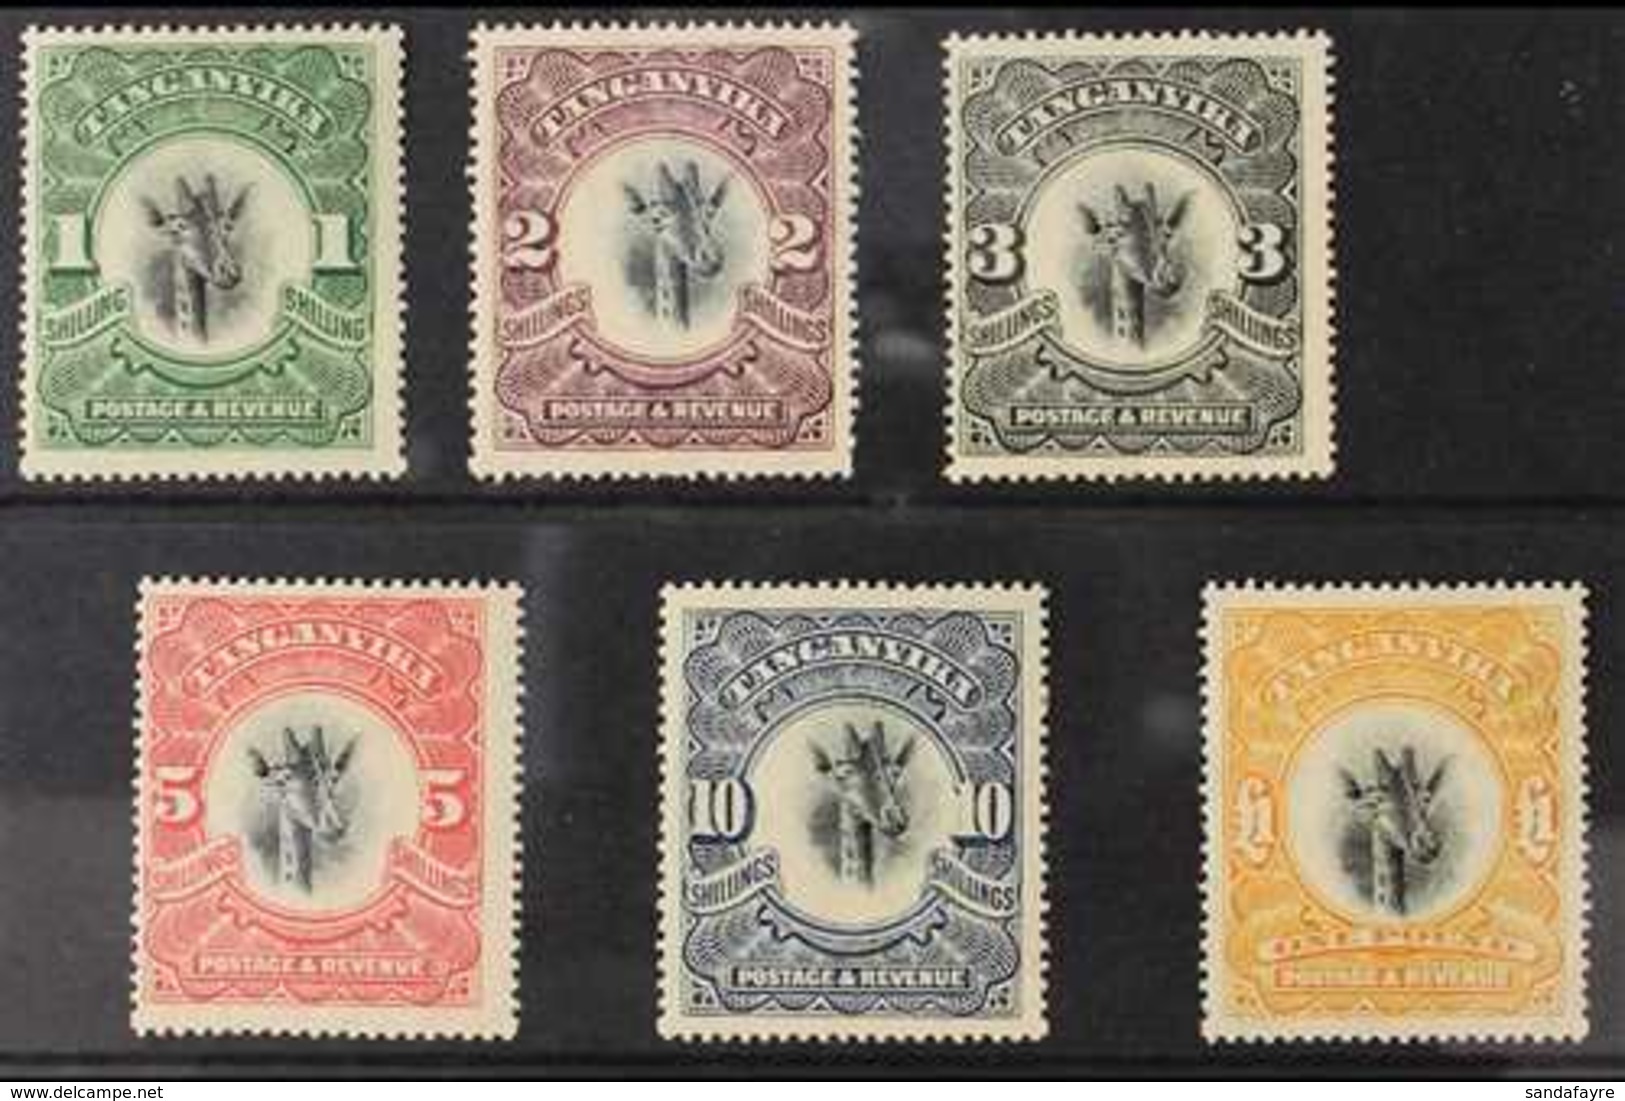 1922 1s To £1 Giraffe High Values, SG 83/8, Very Fine Mint (10s And £1 Particularly Well Centered For This Issue). (6 St - Tanganyika (...-1932)